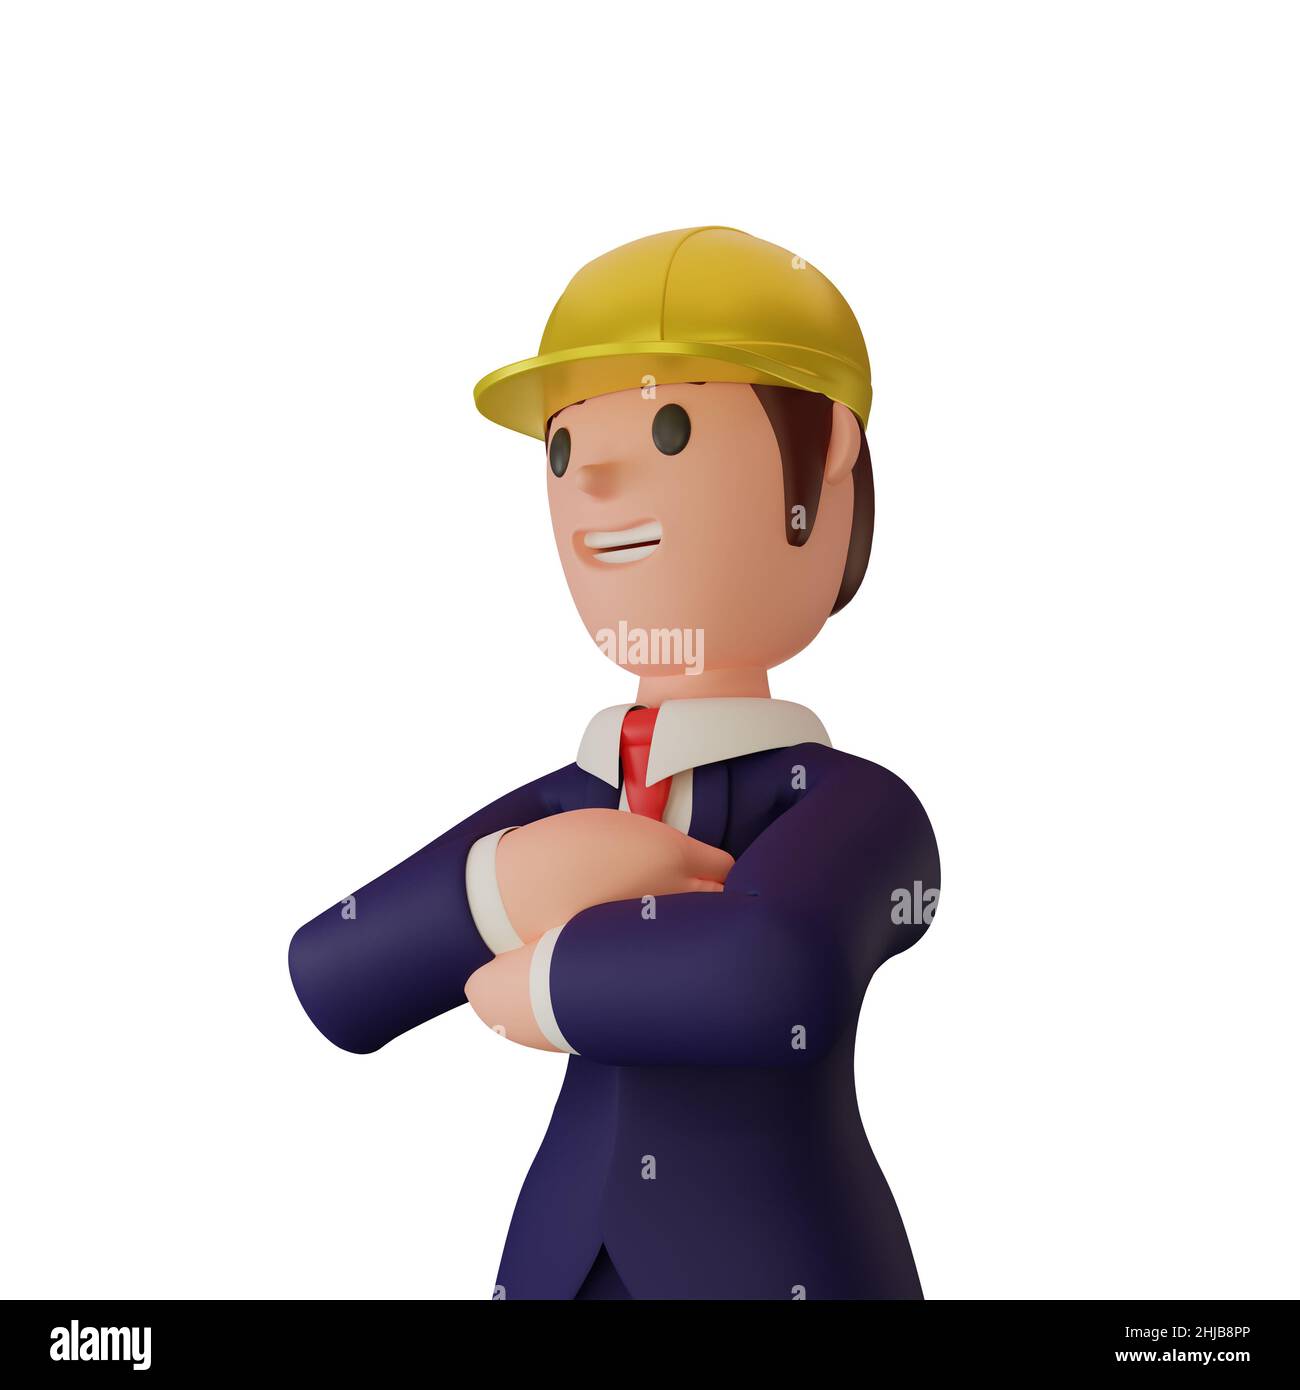 3d rendering of character with business concept Stock Photo